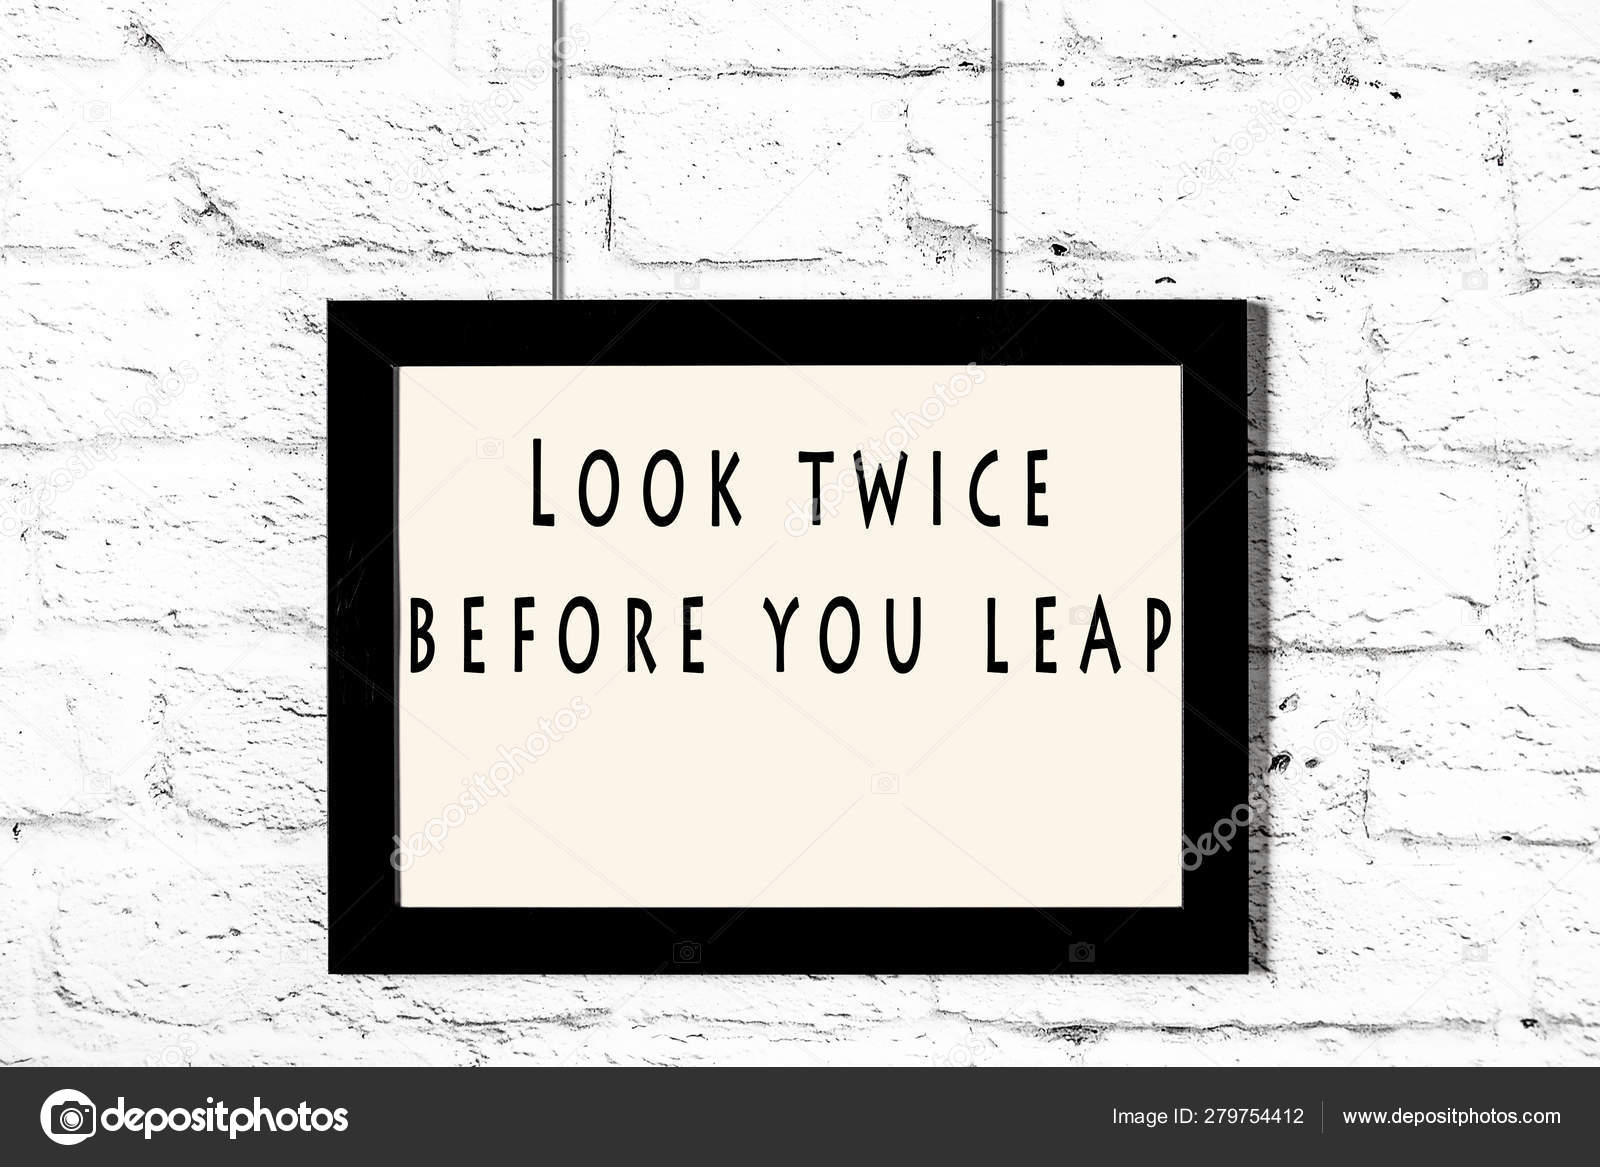 21 Look Before You Leap Stock Photos Images Download Look Before You Leap Pictures On Depositphotos